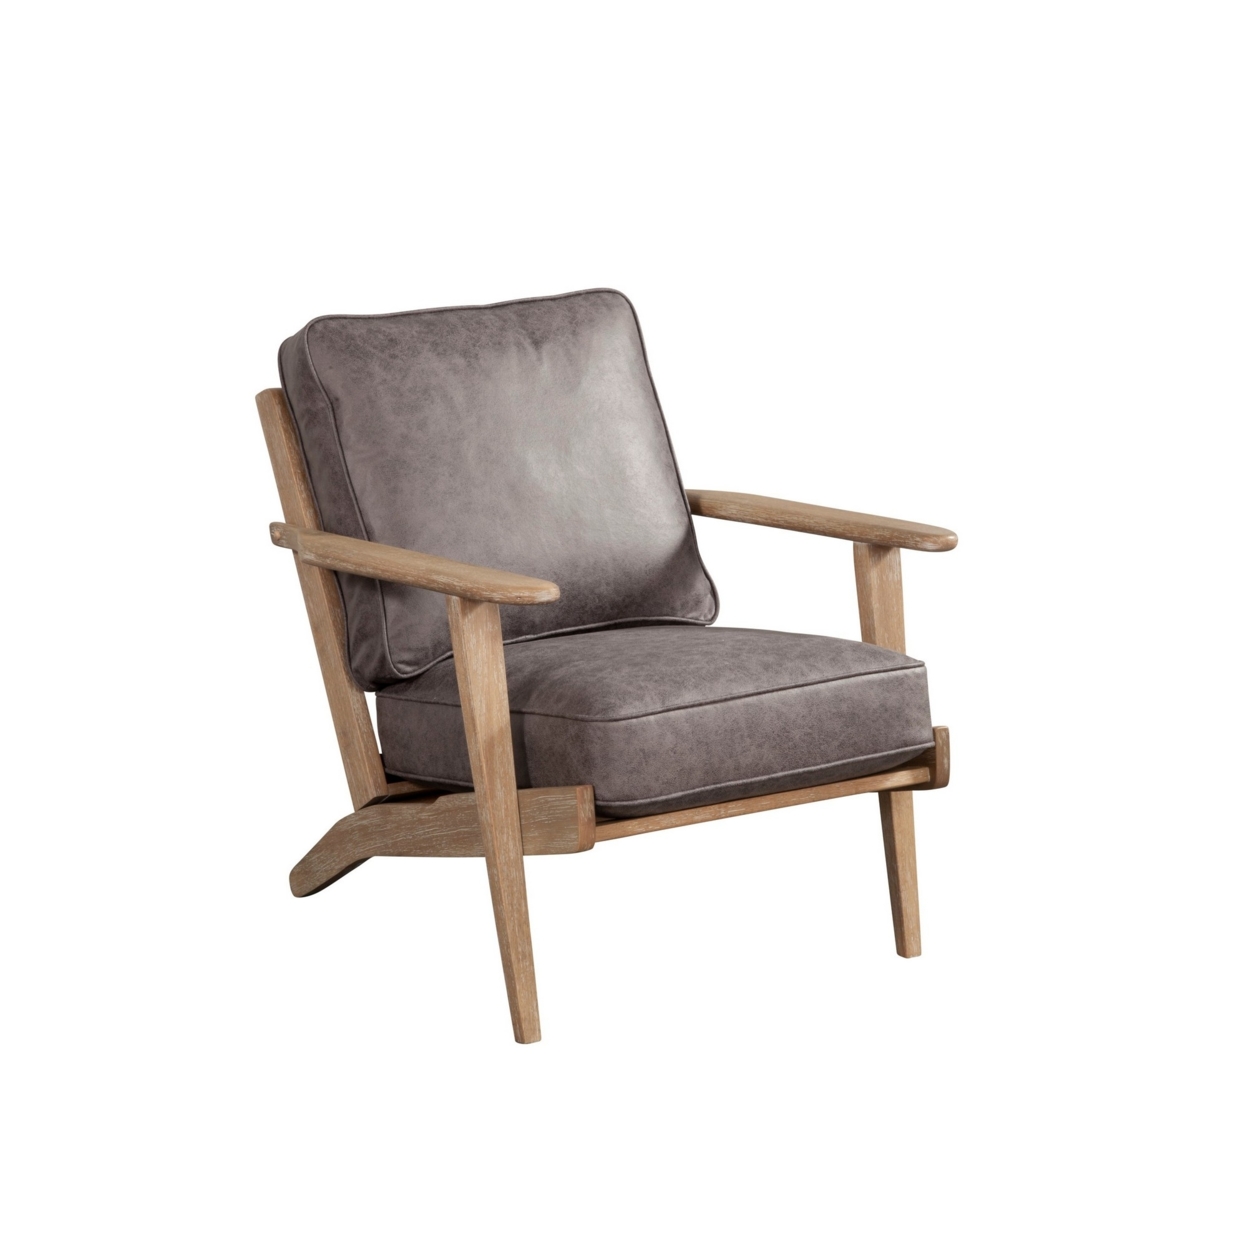 Lounge Chair With Leatherette Seat And Wooden Frame, Gray- Saltoro Sherpi